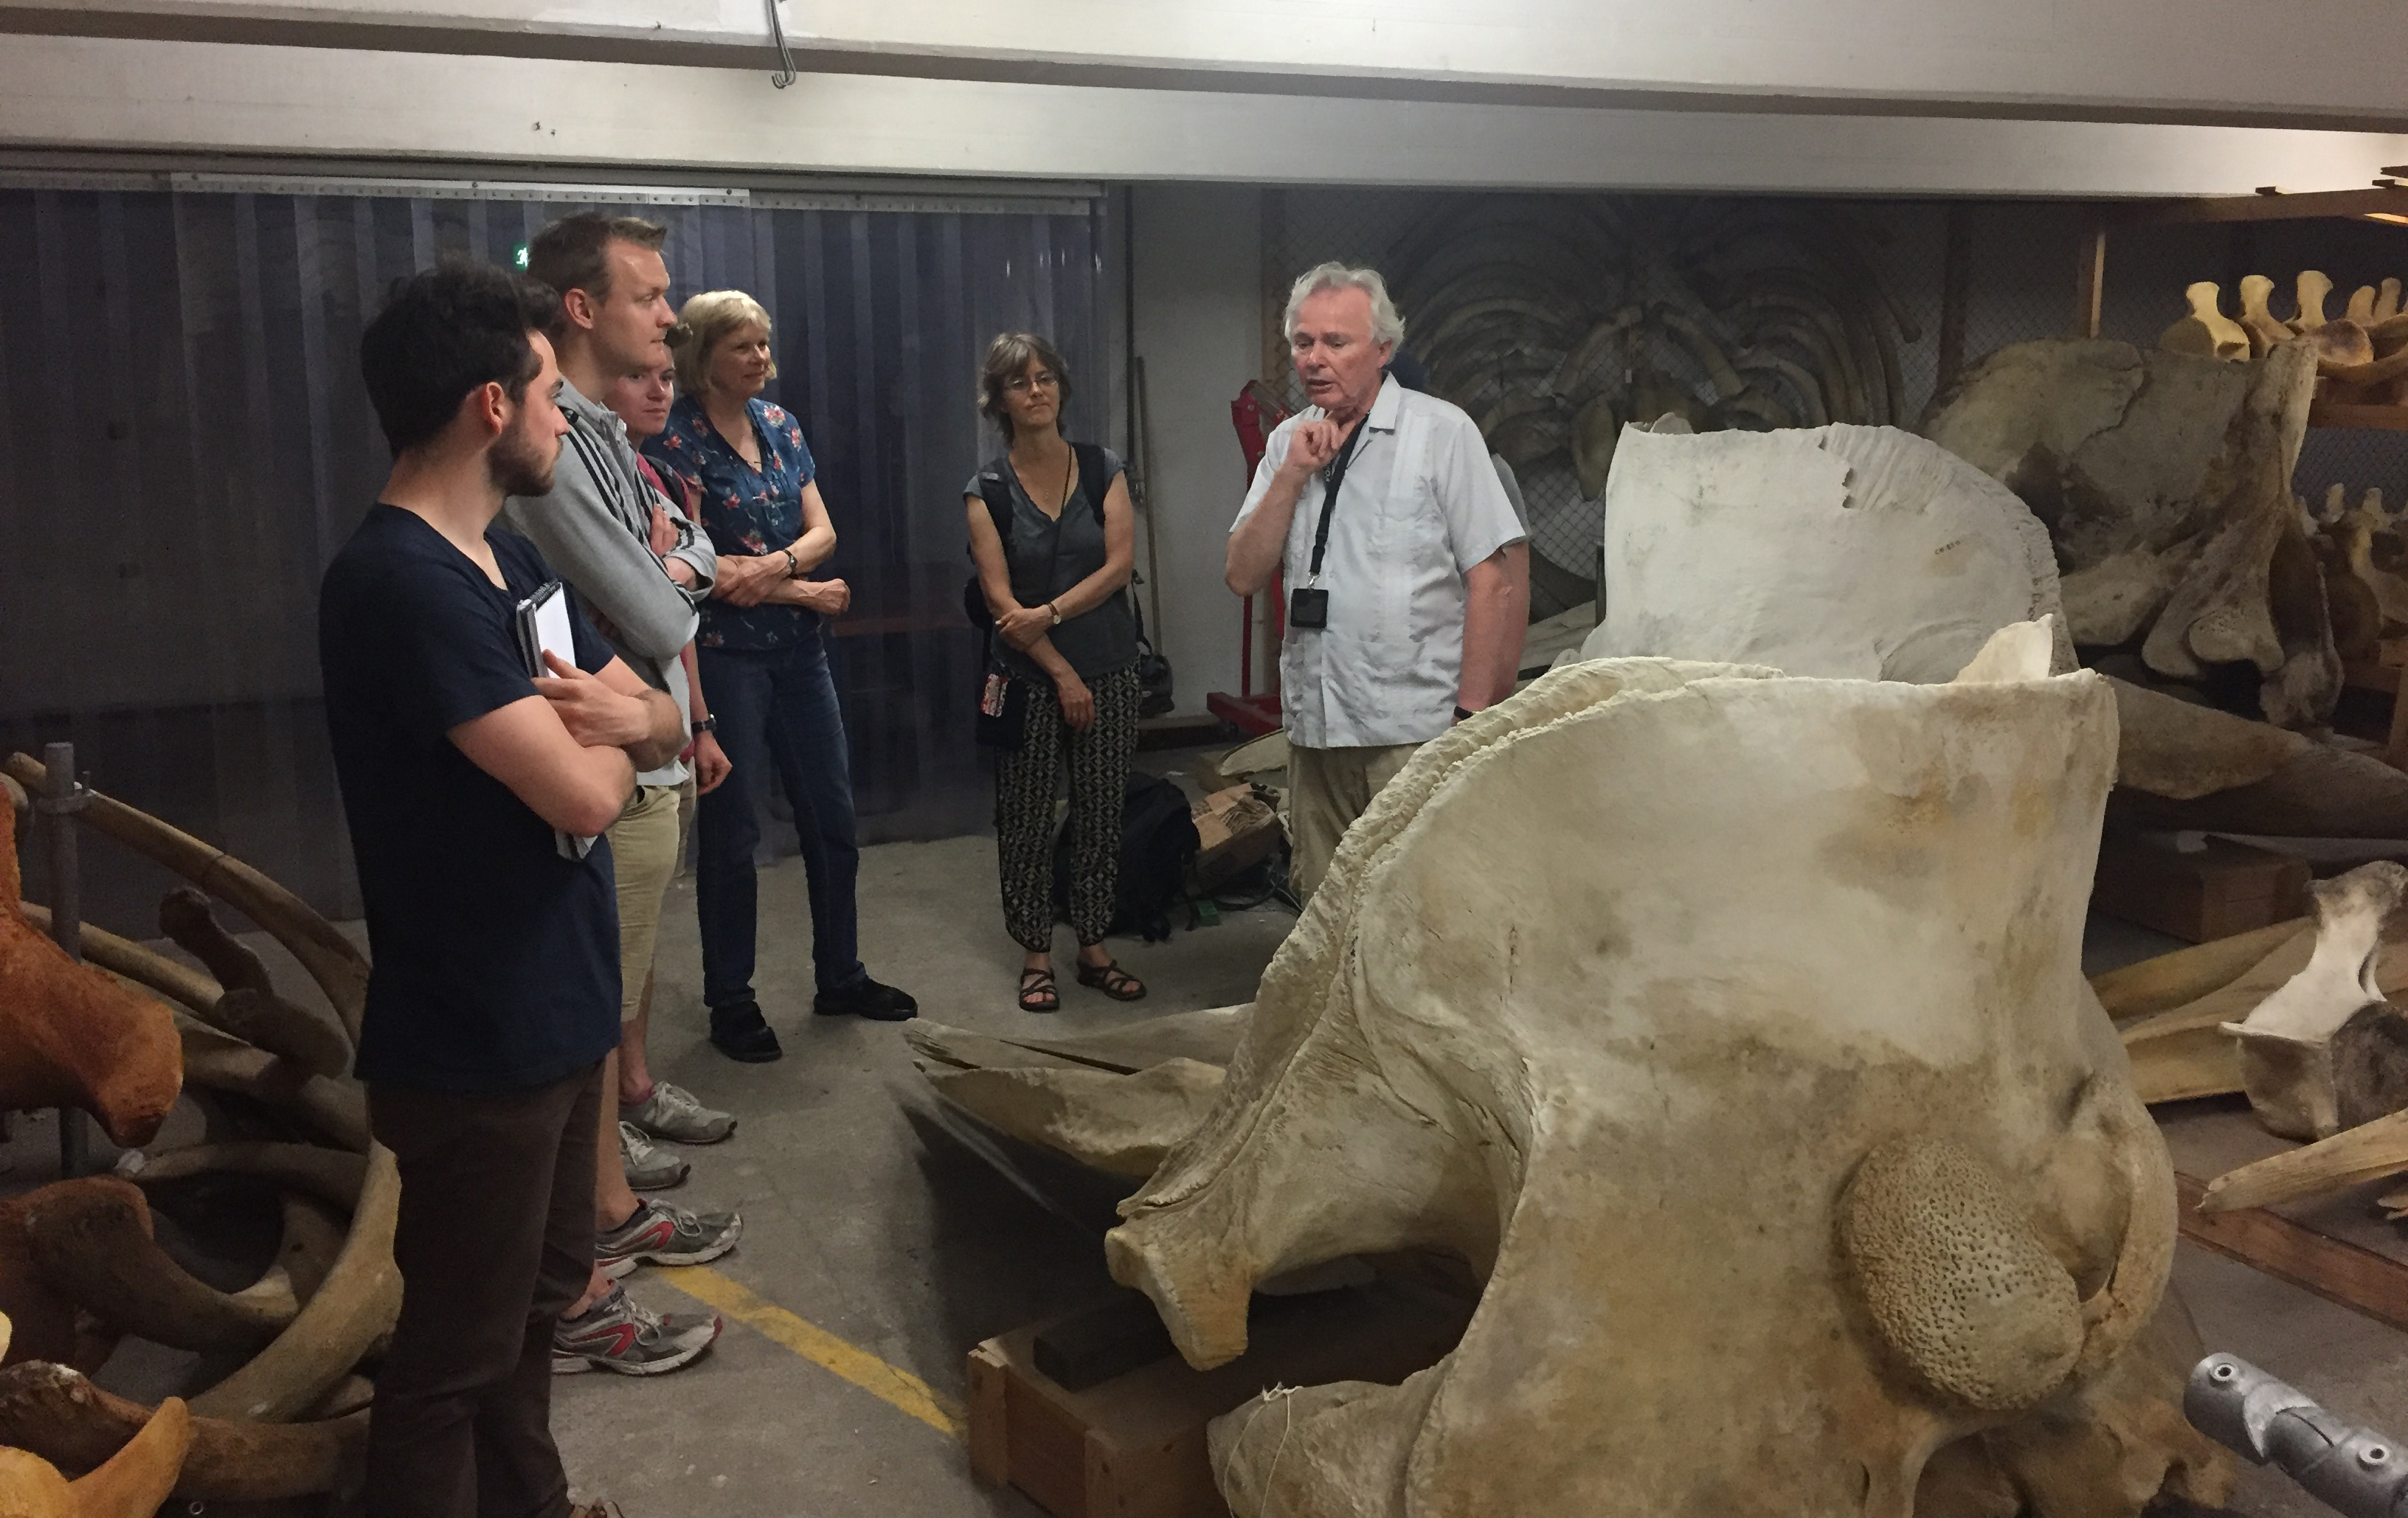 Professor Reinhardt Møbjerg Christensen presenting whale bones at the course "Arctic Nature and Society"